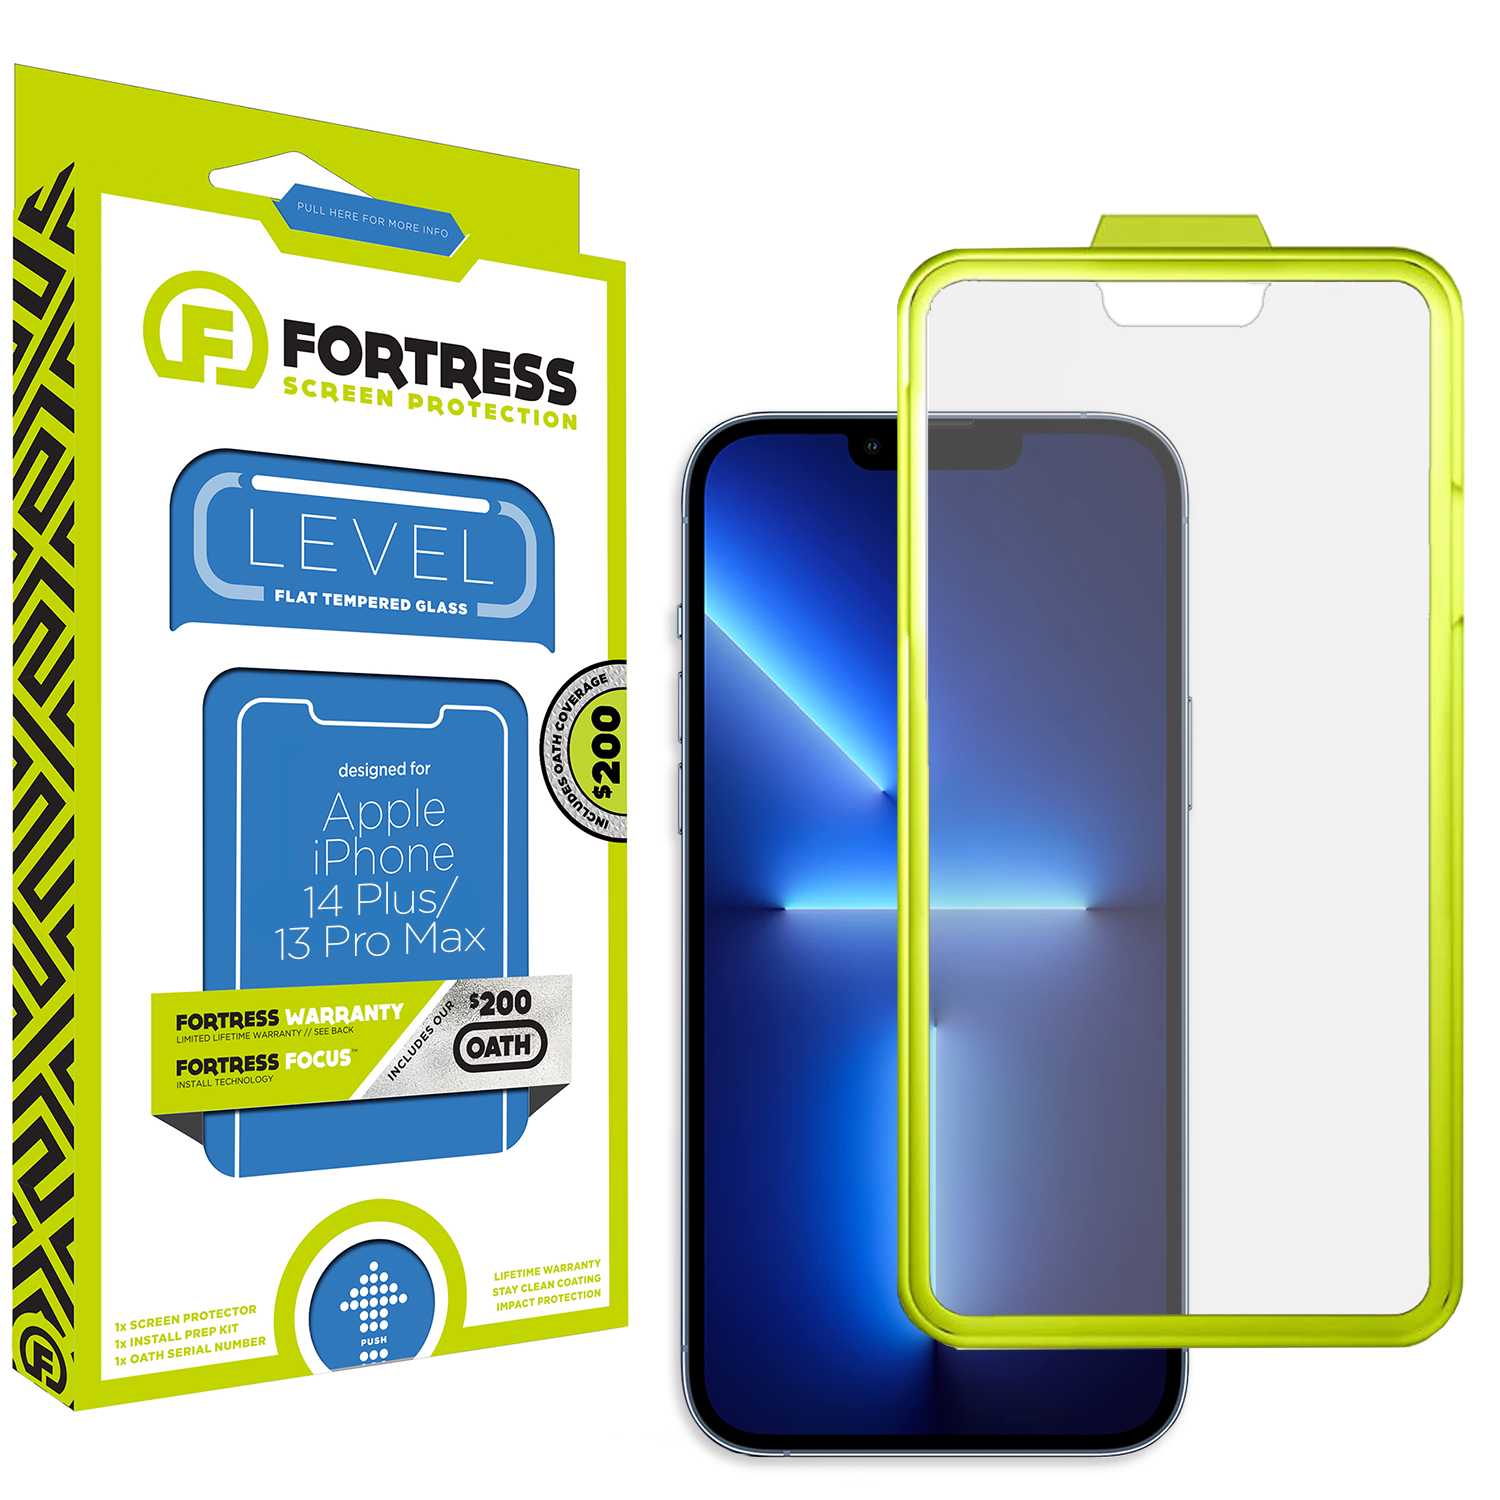 Fortress iPhone 14 Plus Screen Protector - $200 Protection  Scooch Screen Protector